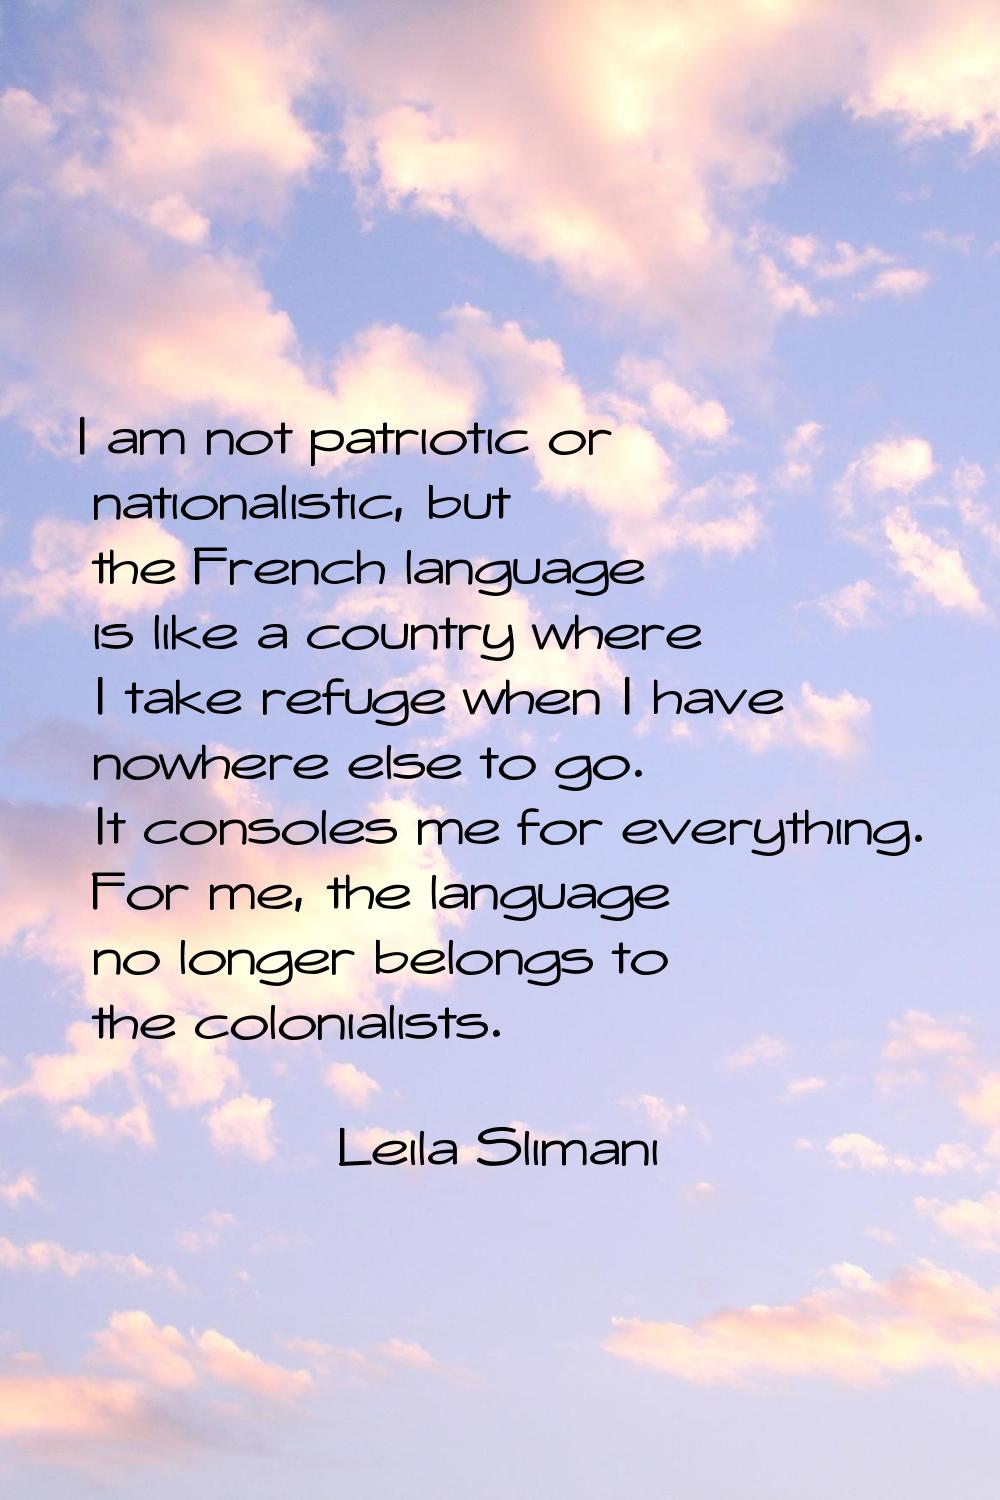 I am not patriotic or nationalistic, but the French language is like a country where I take refuge 